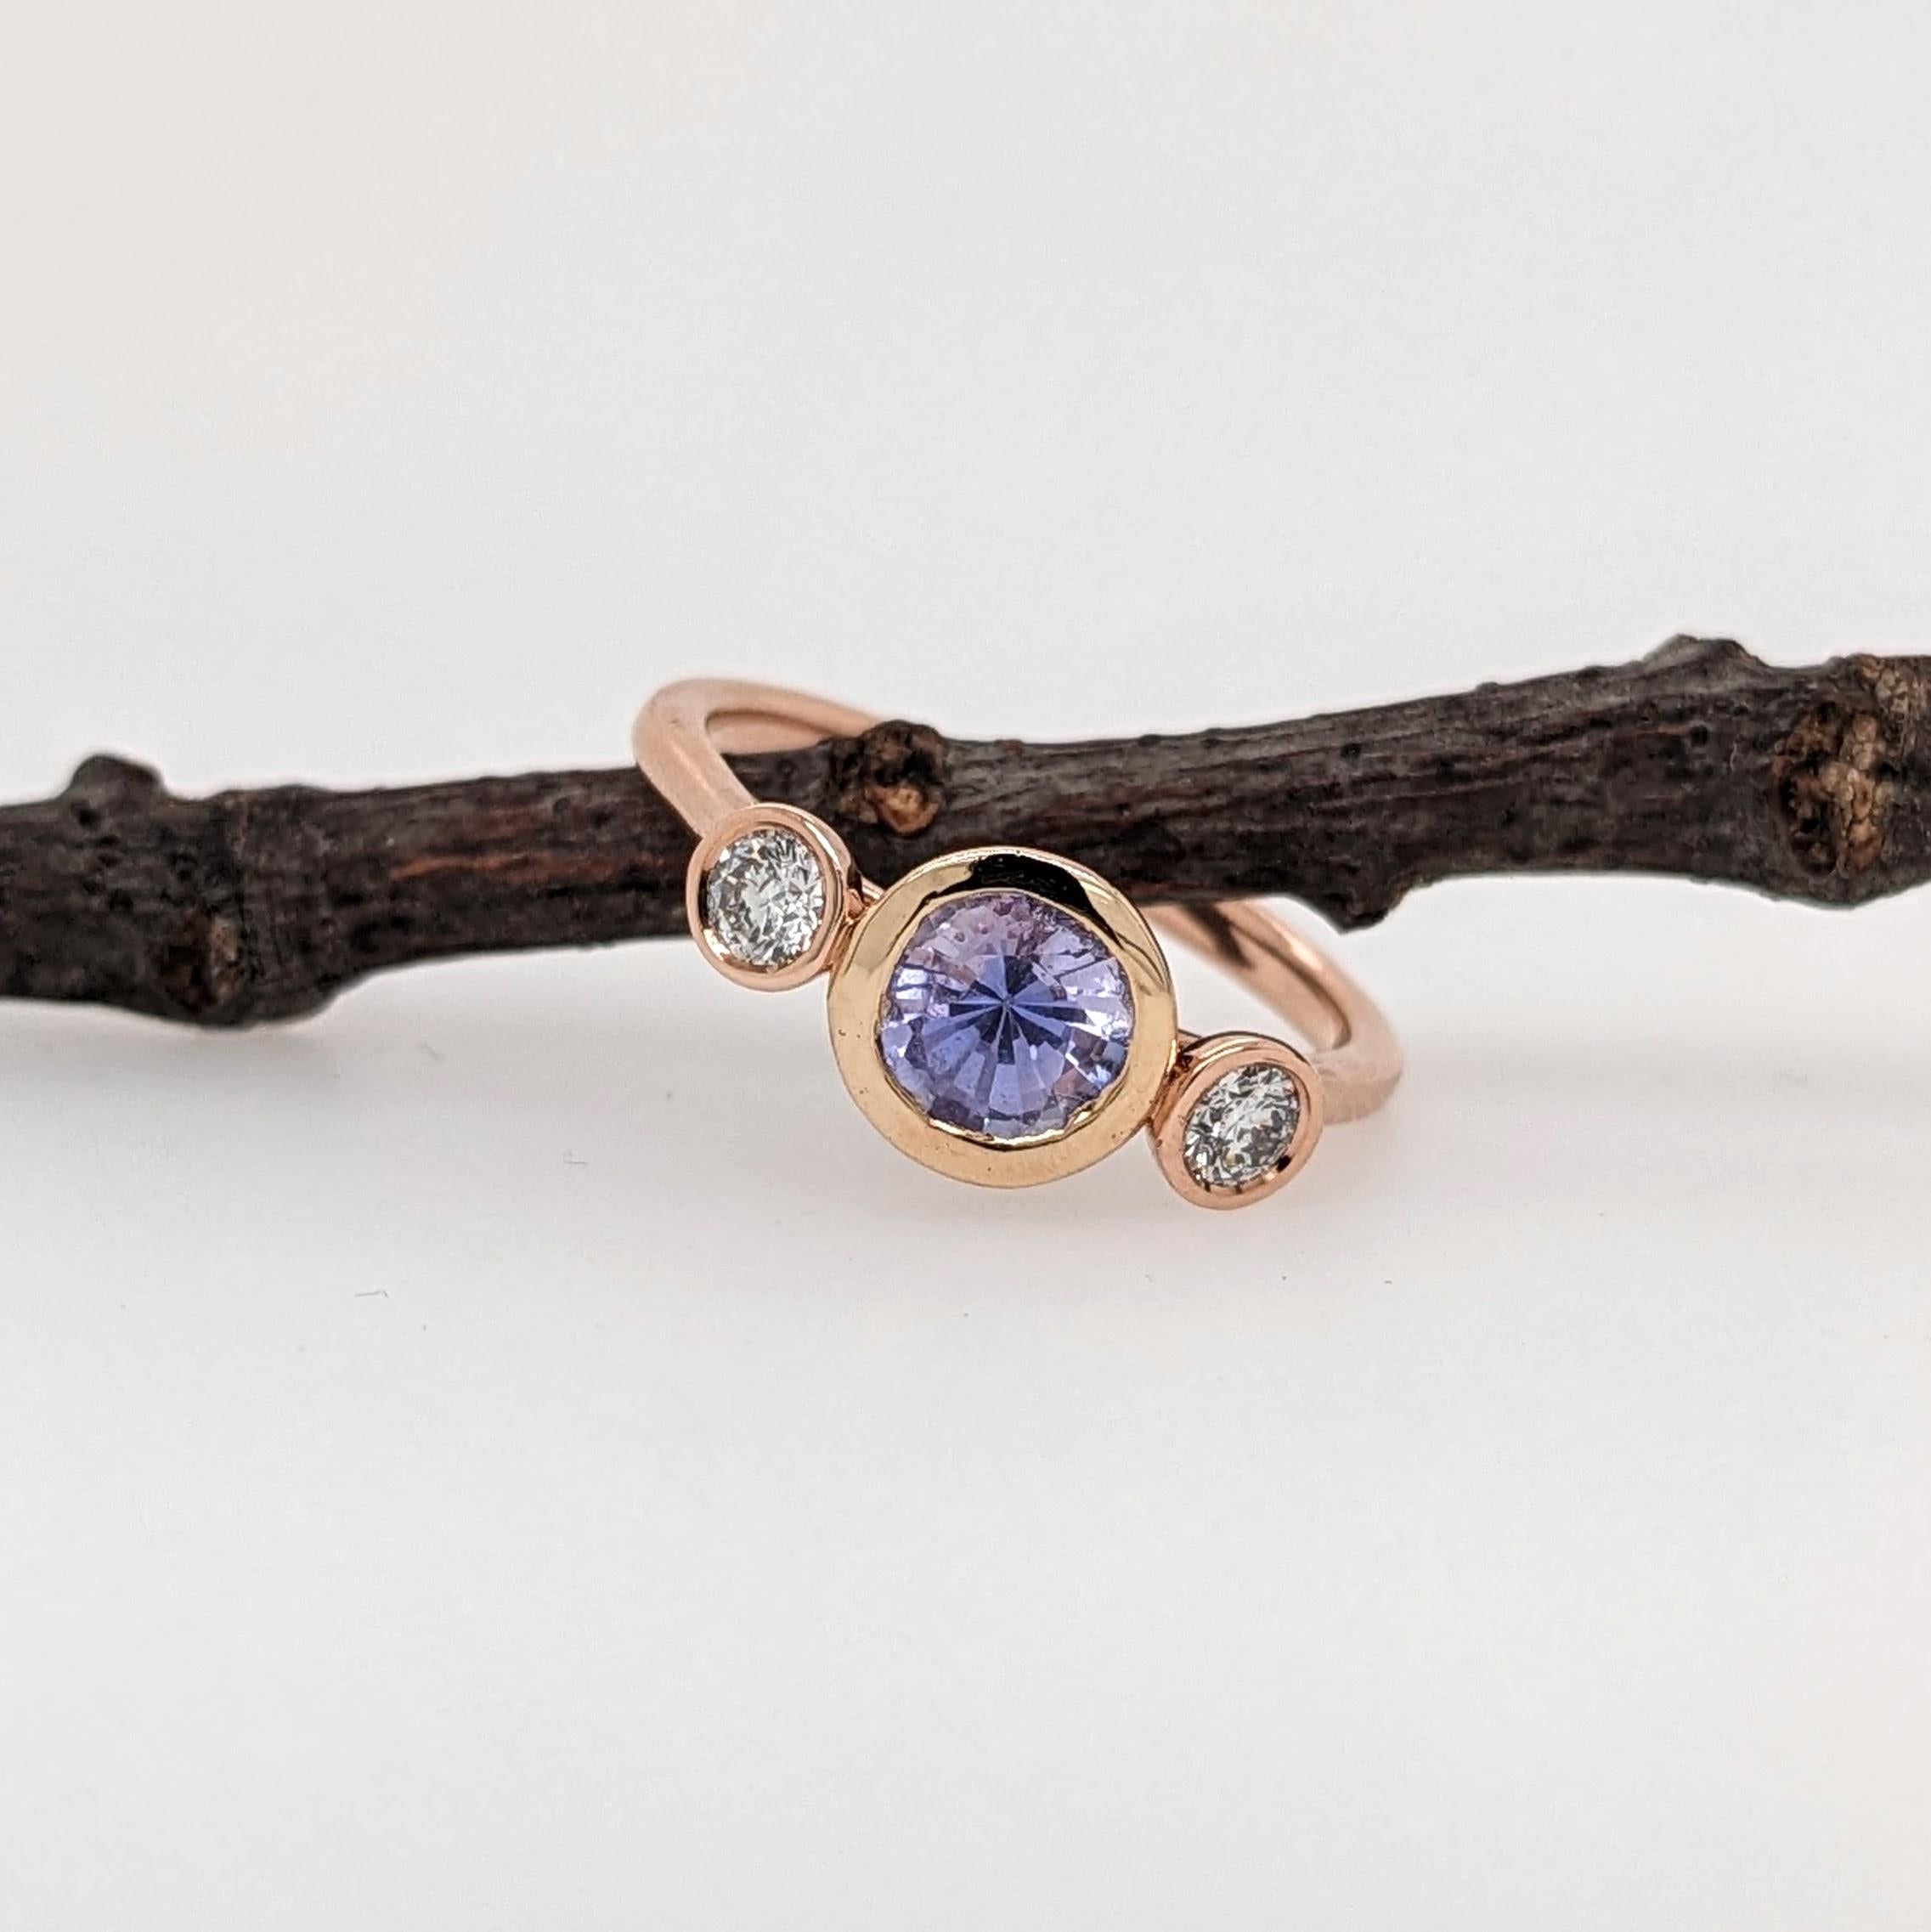 This beautiful ring features a stunning Tanzanite in 14K rose gold with natural diamond accents. This ring makes for a stunning accessory to any look!
A fancy ring design perfect for an eye catching engagement or anniversary. This ring also makes a